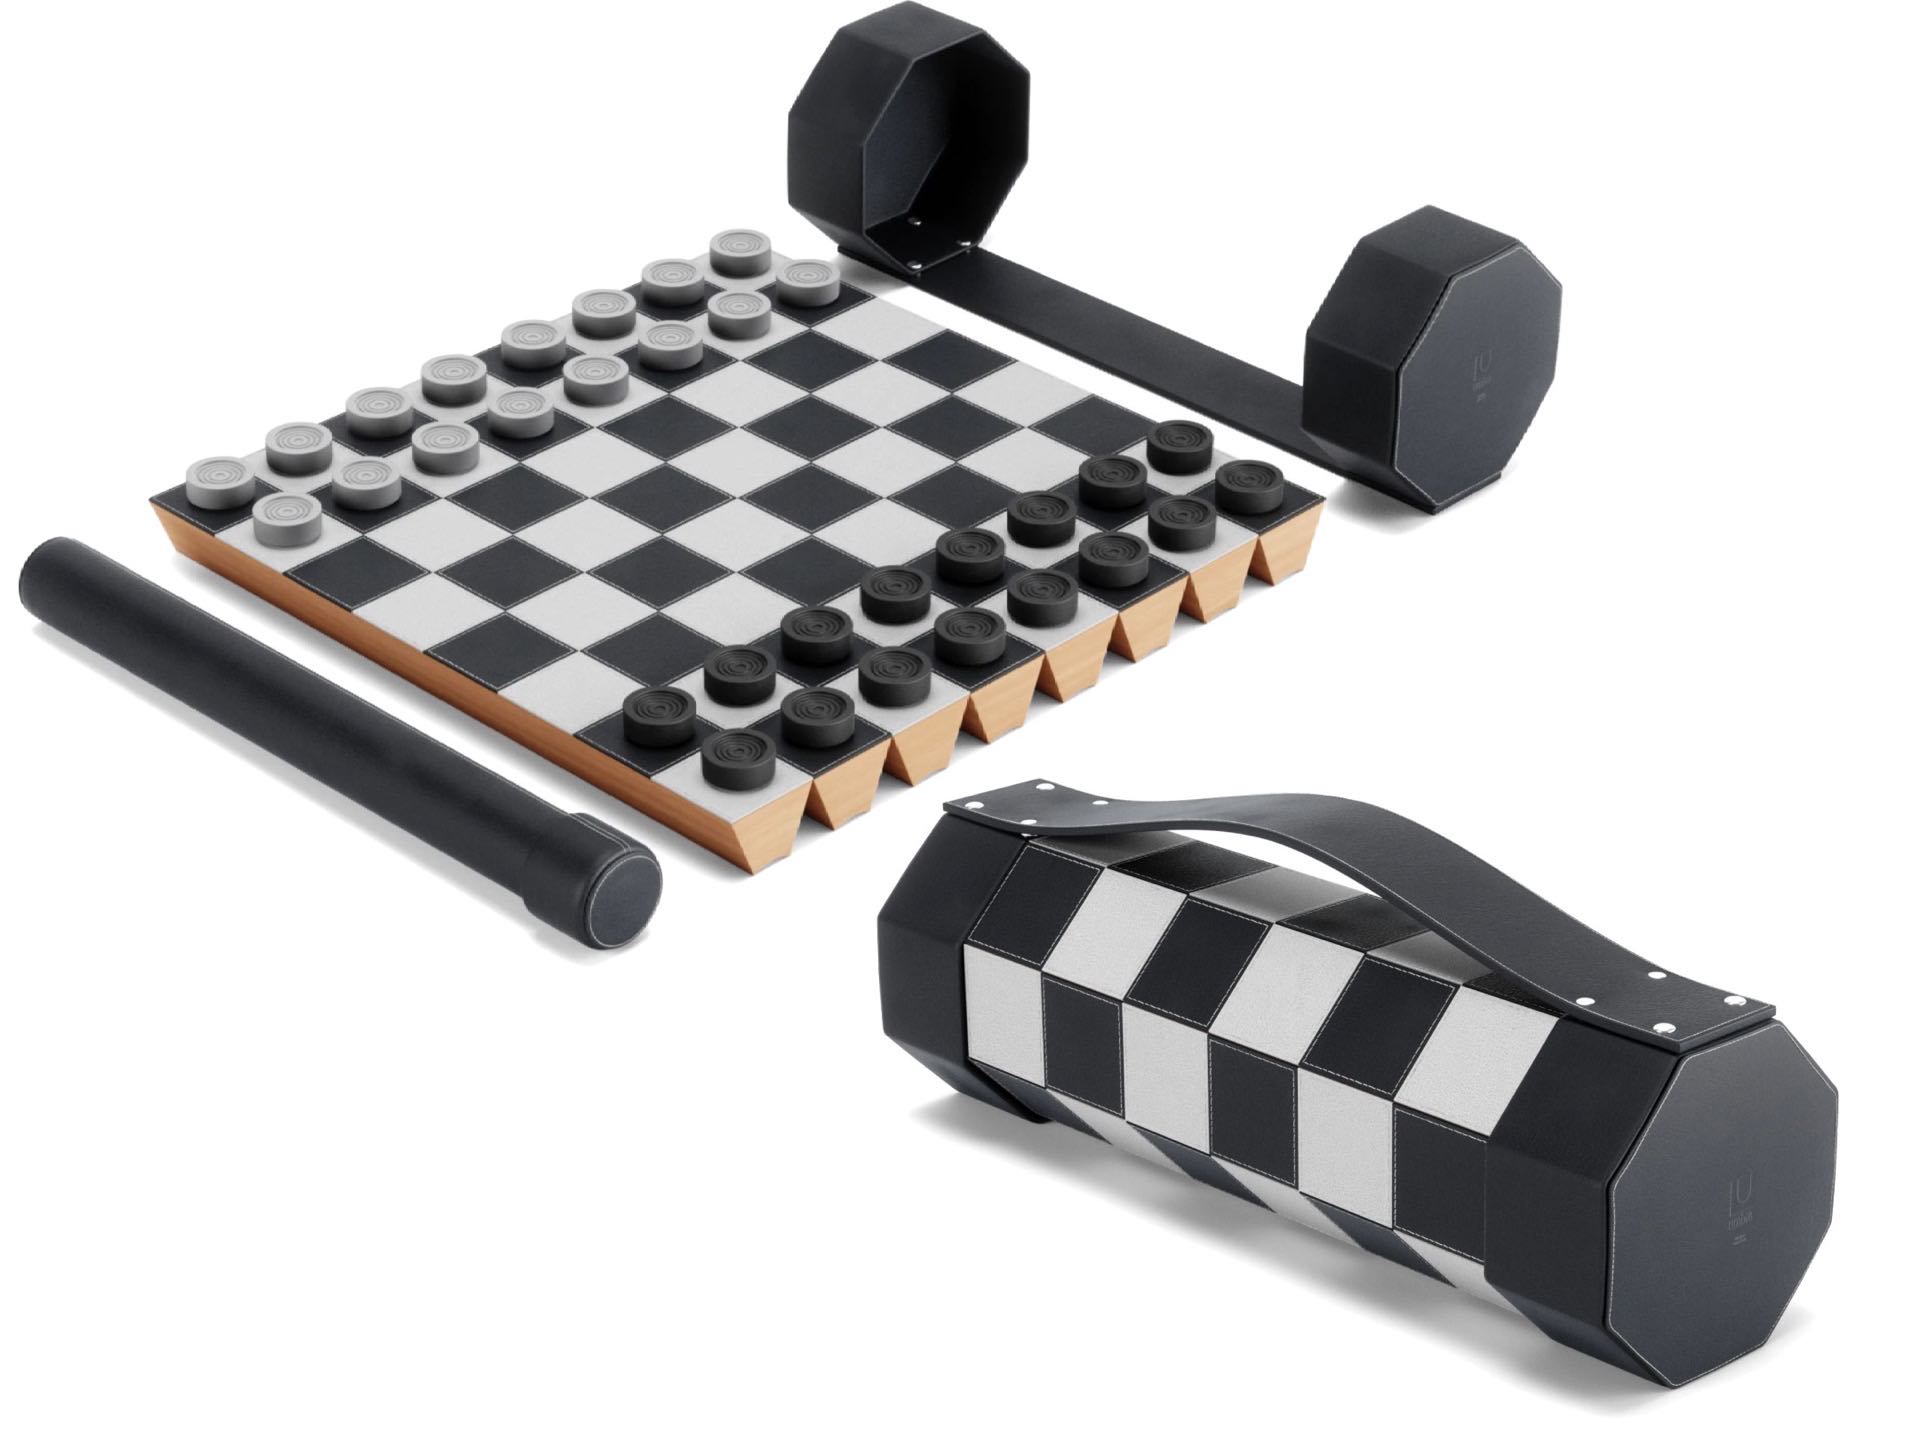 Umbra “Rolz” roll-up chess/checkers set. ($100)